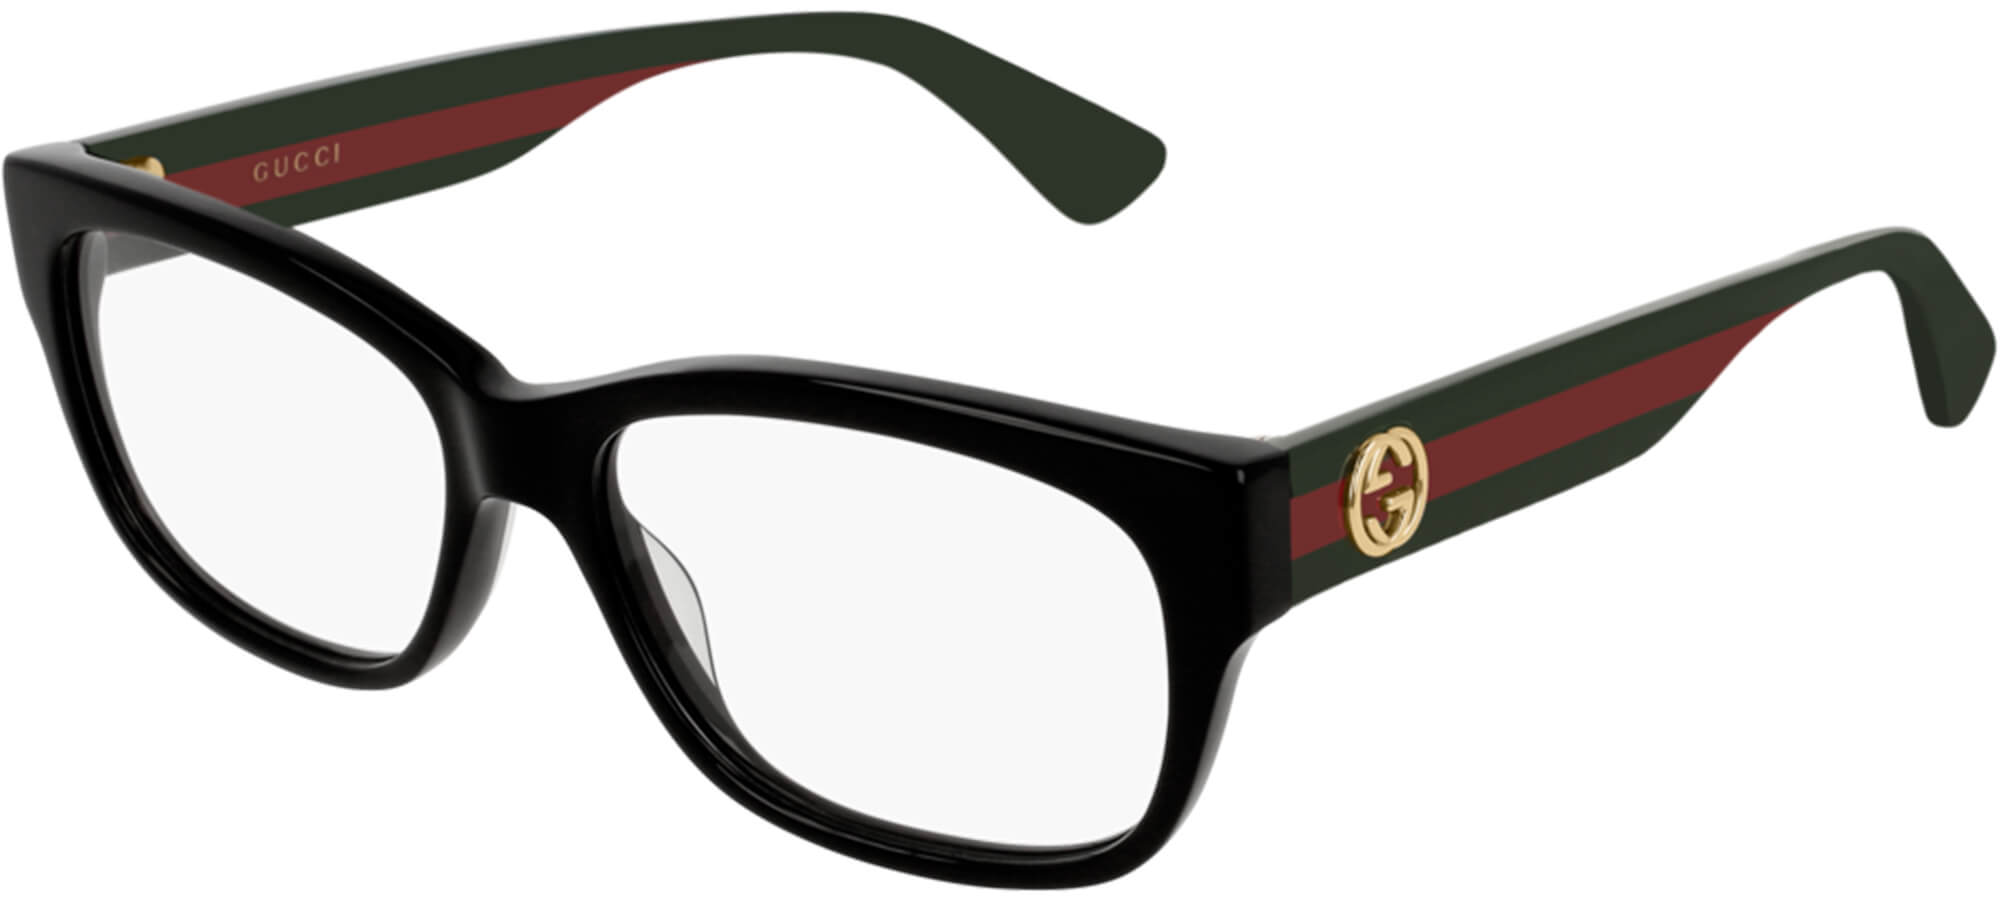 GucciGG0278OBlack Green Red (009 W)